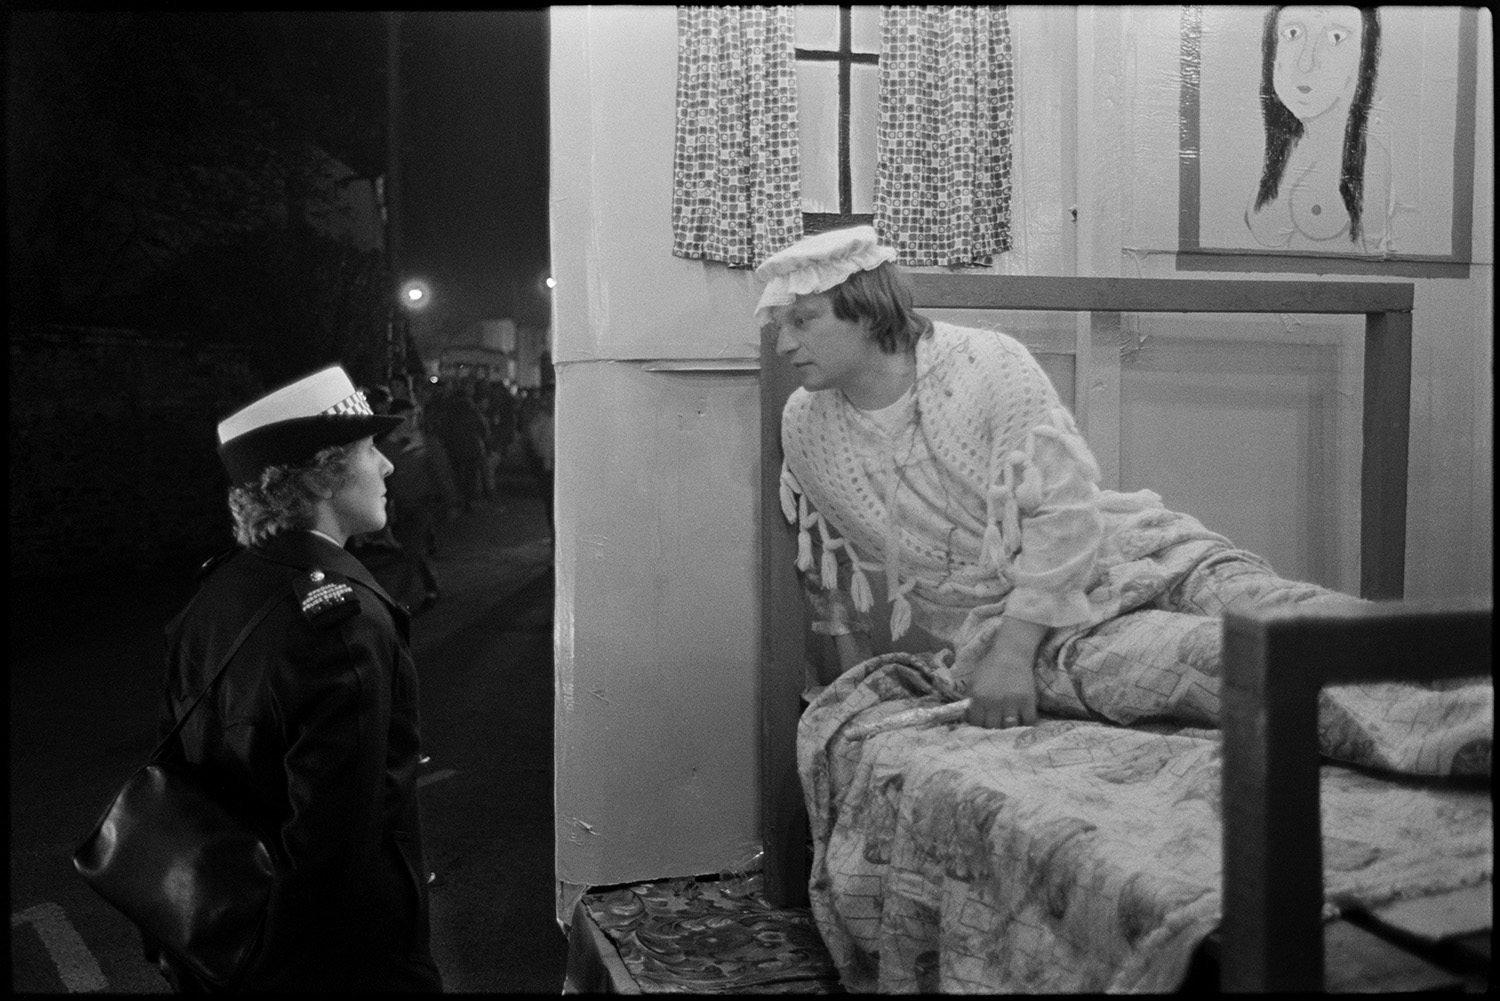 Carnival floats at night, queen and attendants, fancy dress.
[A carnival float during the evening procession at Dolton Carnival. A young man in fancy dress is lying on a bed and talking to a policewoman standing by the carnival float.]